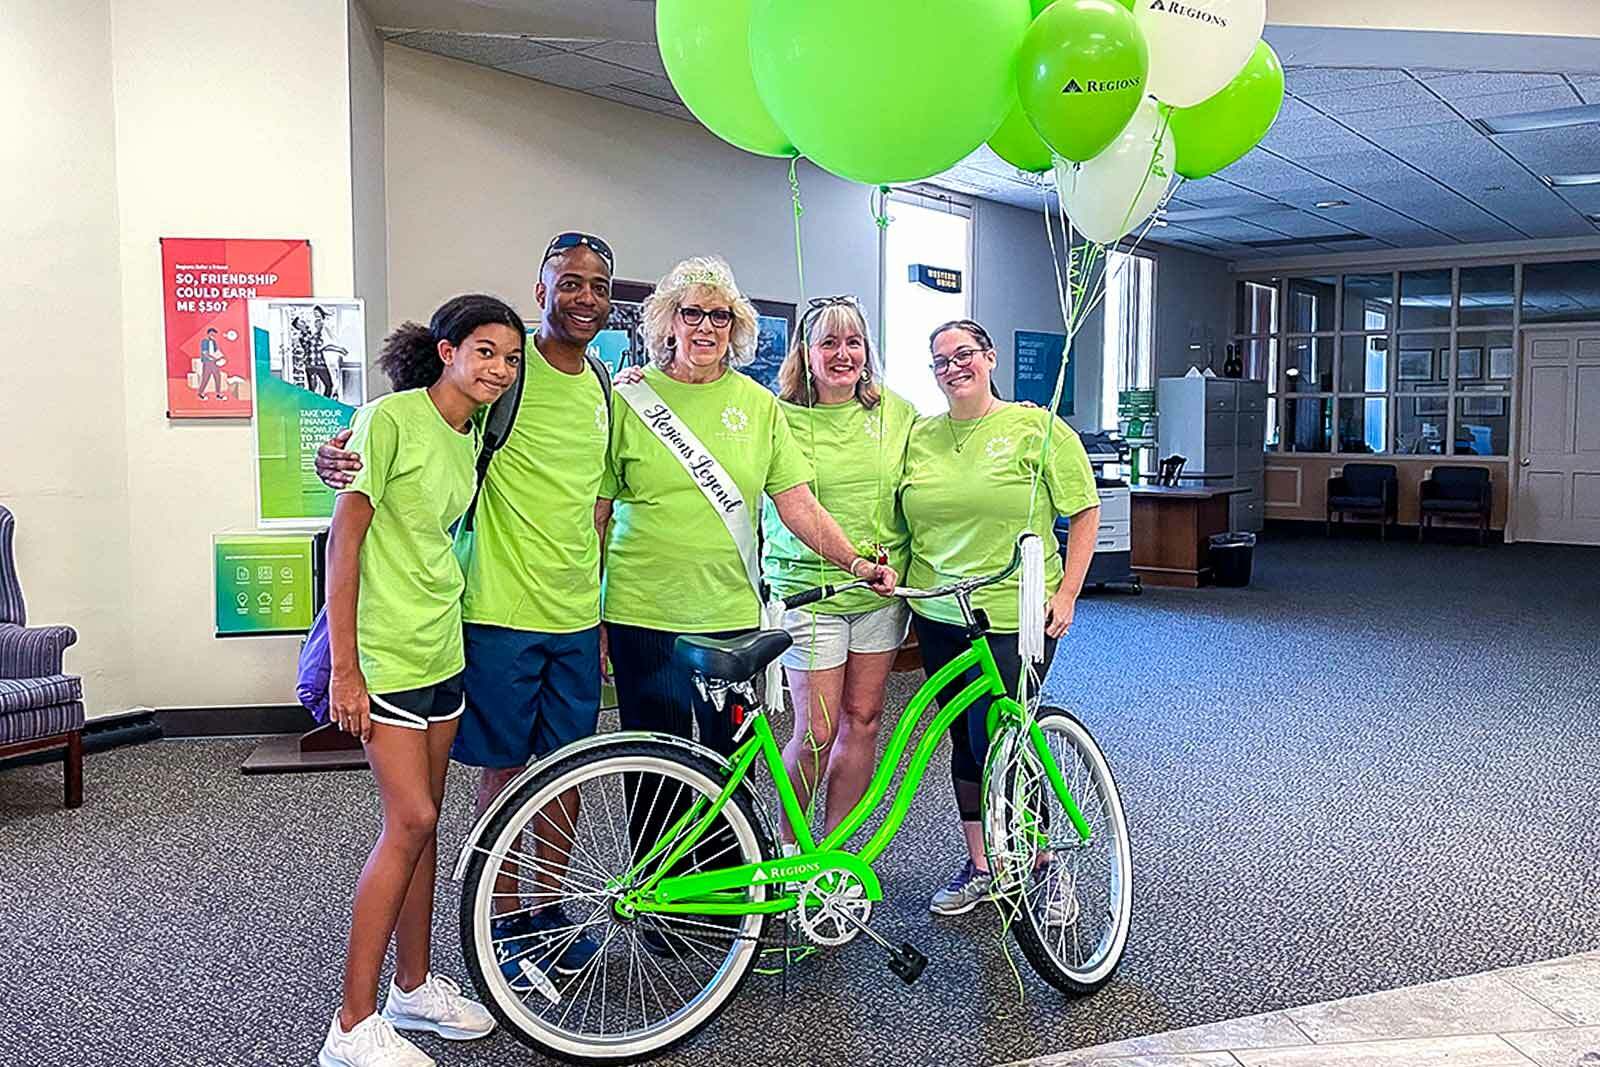 Mary Lou with team and green bike